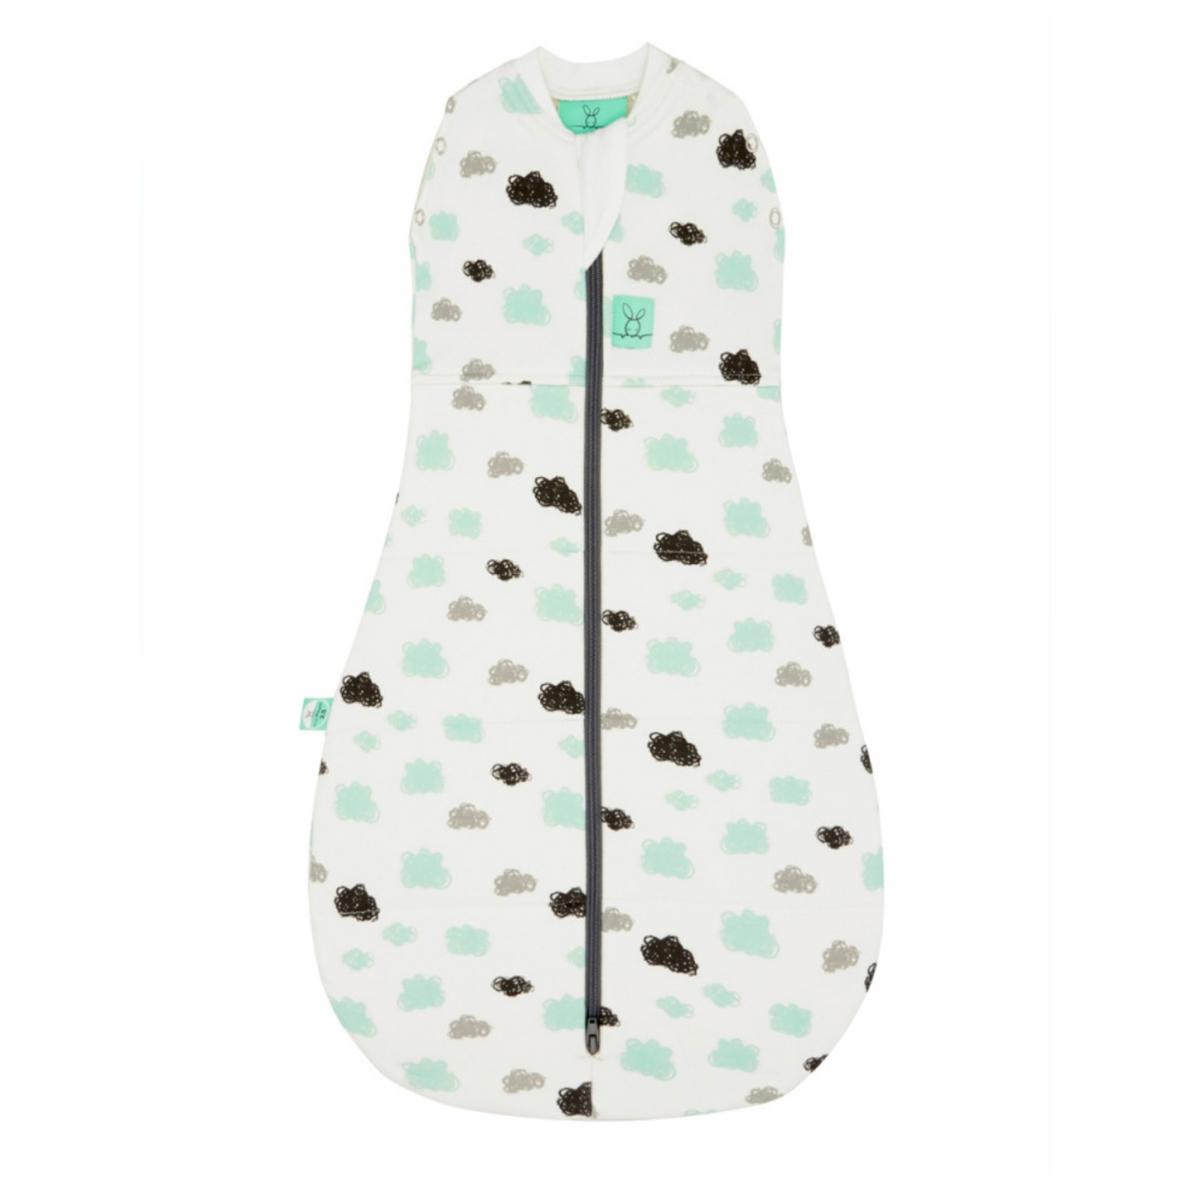 COCOON SWADDLE BAG 2.5 TOG - 0-3M - CLOUDS